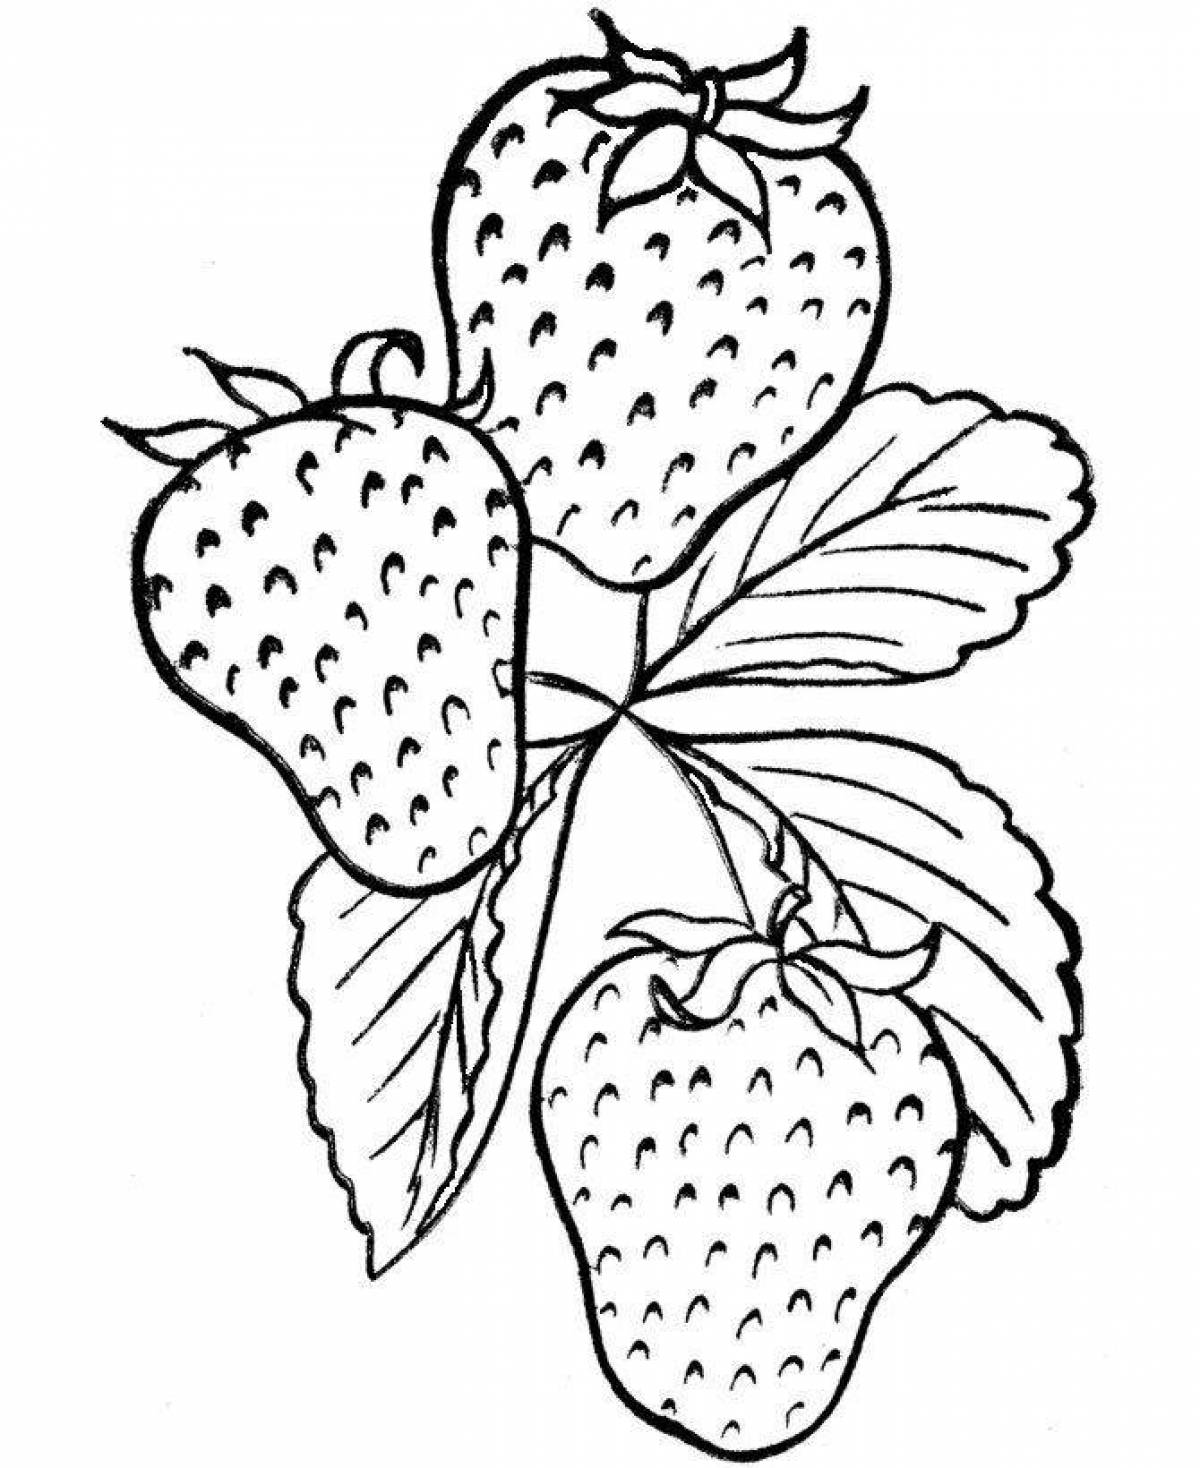 Rich berries and fruits coloring book